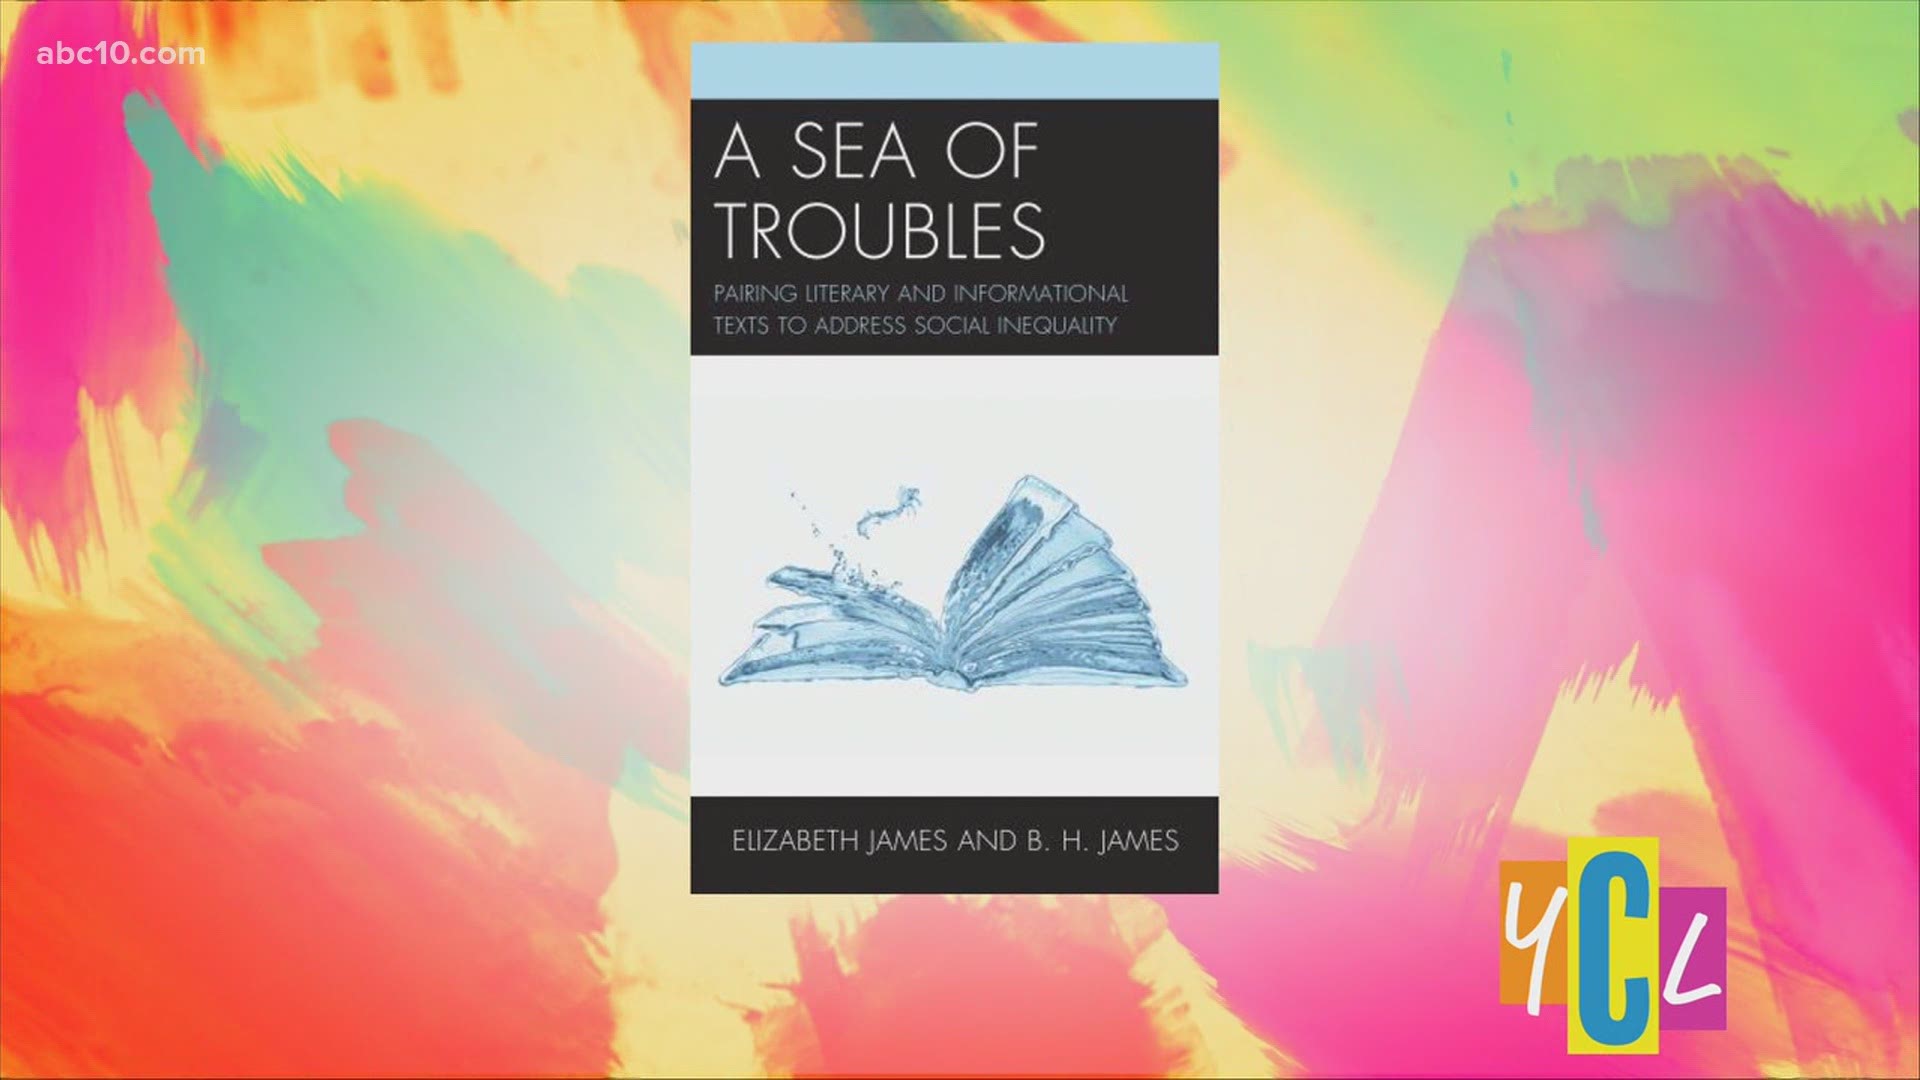 Stockton teachers, Elizabeth and B. H. James, release new book pairing literary and informational texts to address social inequality in "Sea of Troubles."